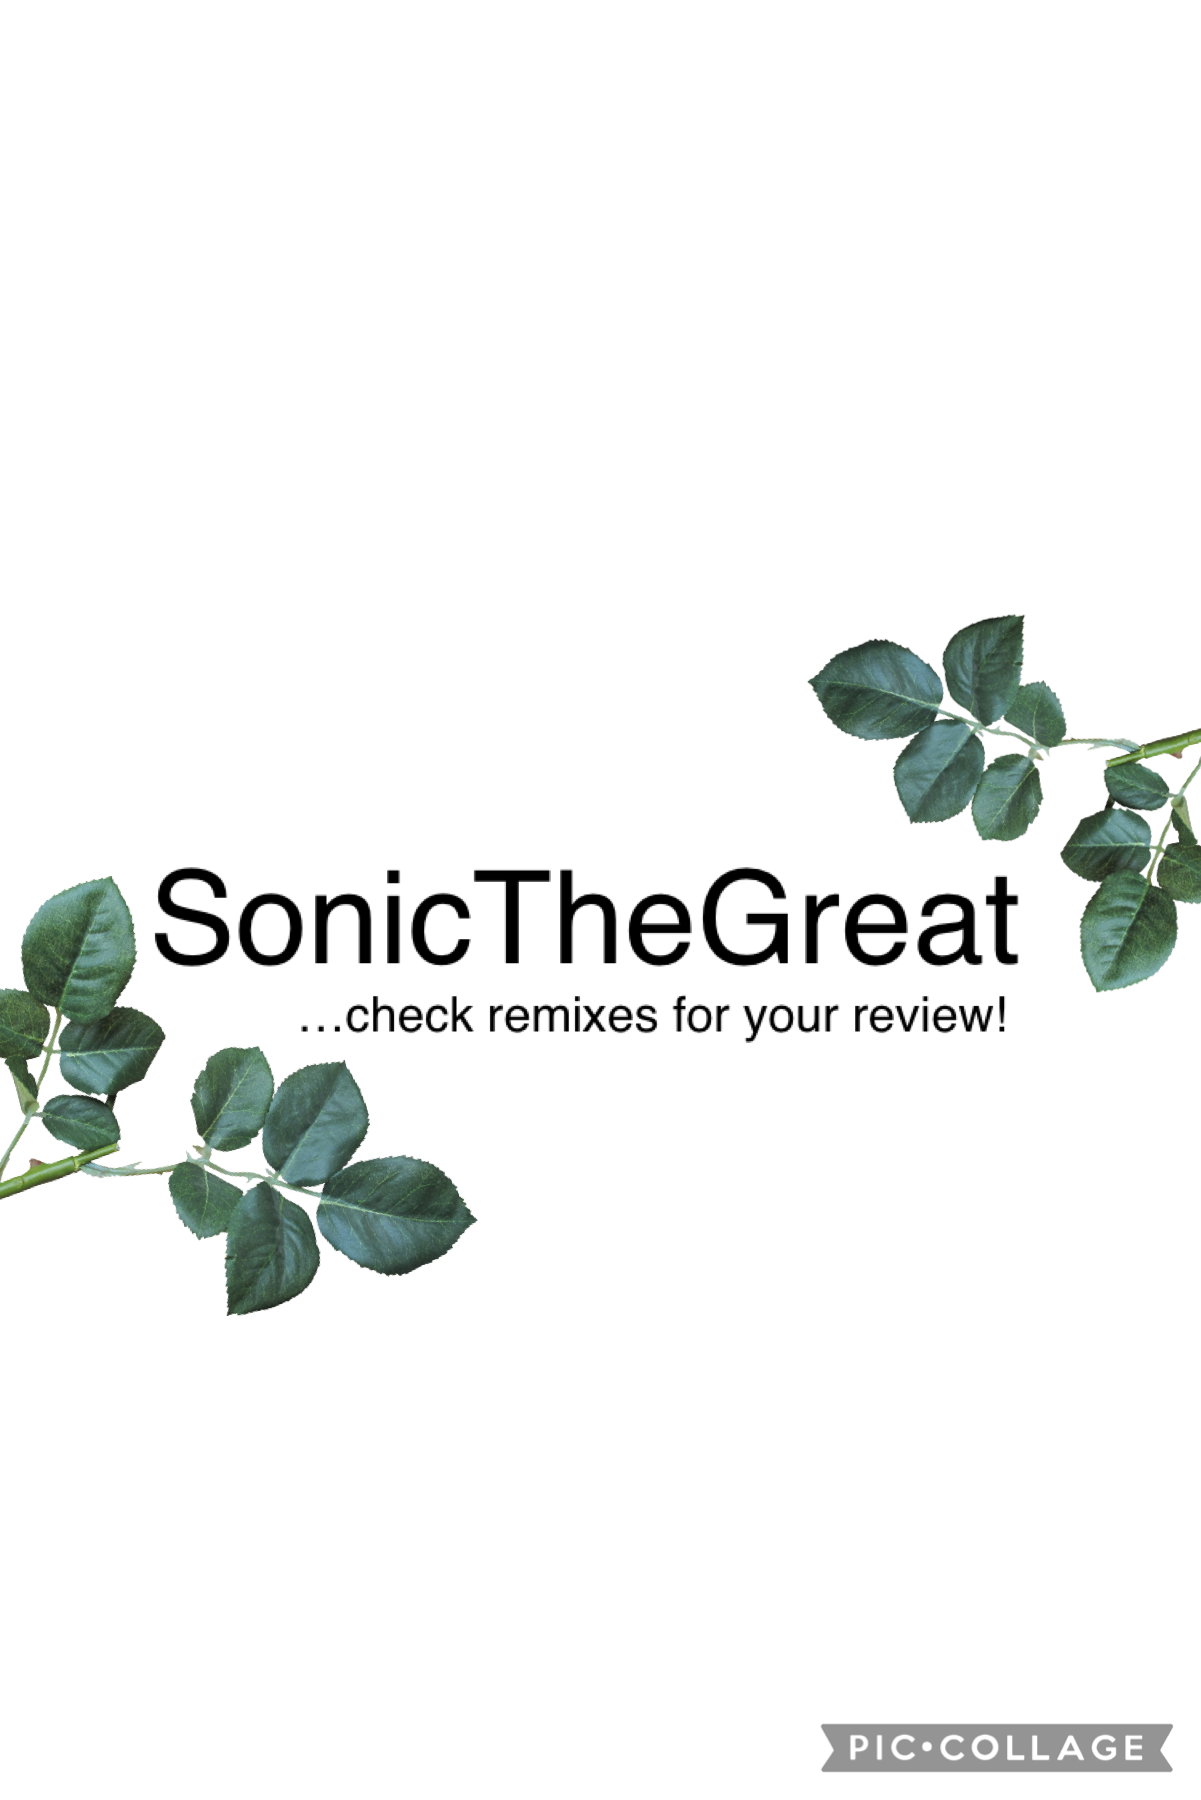 Check remixes for your review!